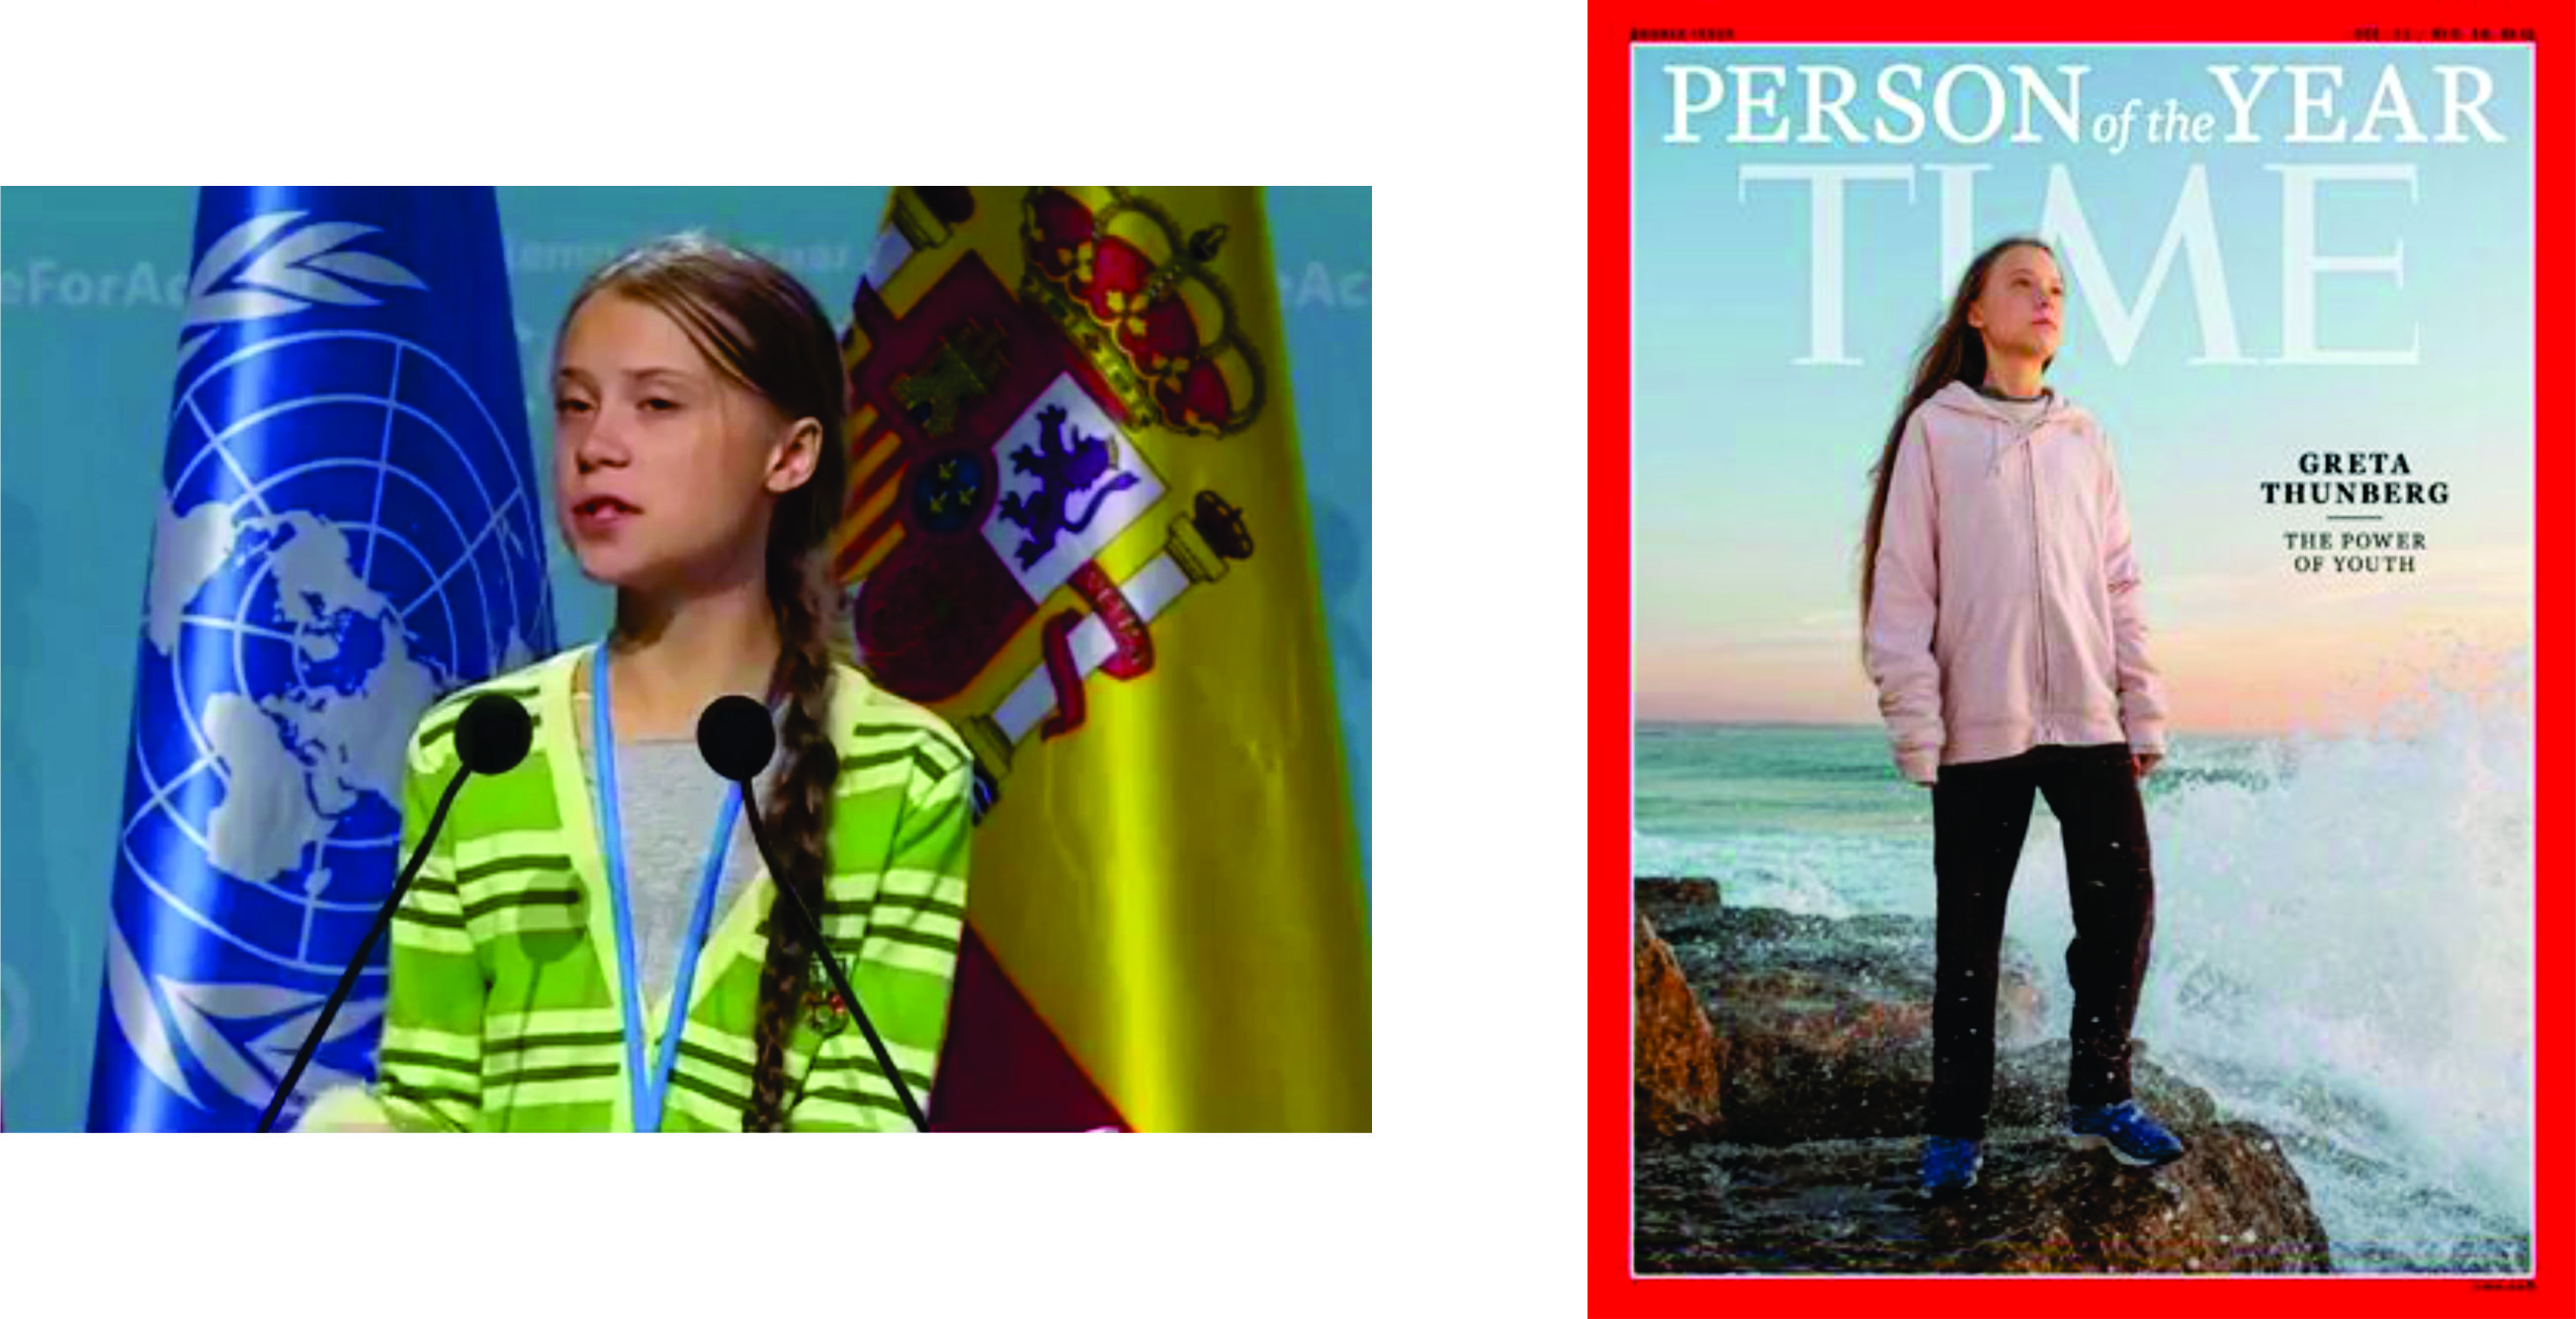 Greta's "person of the year," but her climate kids are emotional and vacuous at COP 25